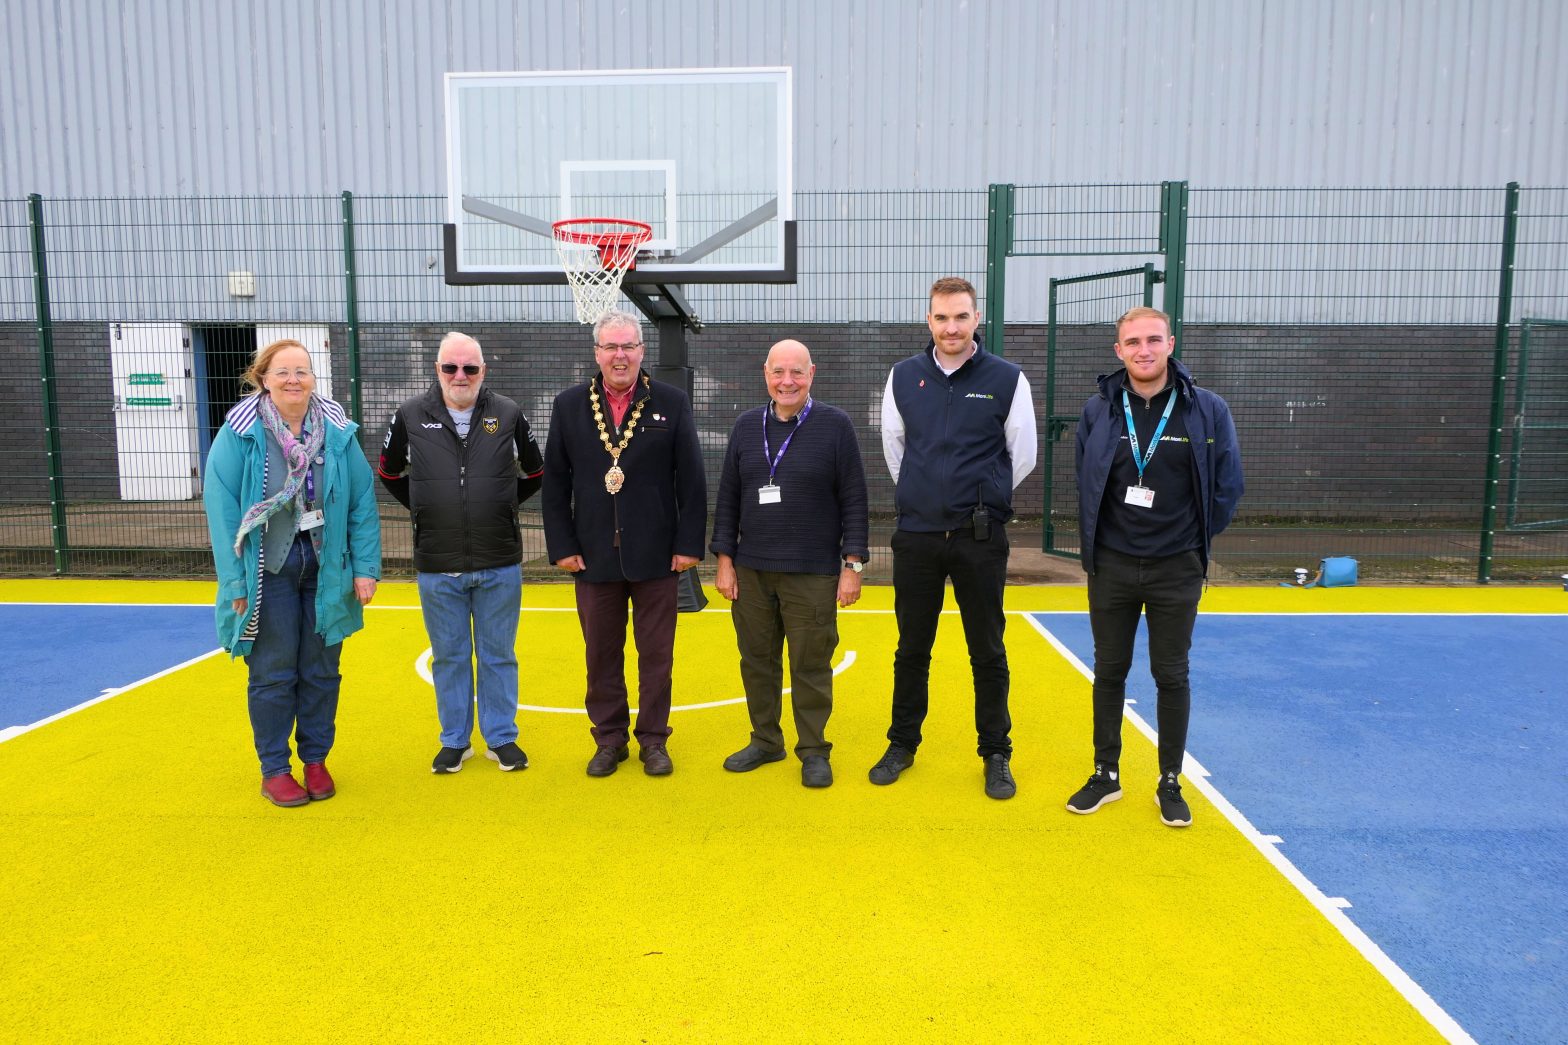 Photo on the new MUGA at Caldicot Leisure centre. From left to right, Cllr Jackie Strong, Cllr I R Shillabeer (Caldicot Town Council) , Chair of Monmouthshire County Council Cllr Meirion Howells, Cabinet Member for Education Cllr Martyn Groucutt, Joe Killingley, Caldicot Leisure Centre Manager and Jack Harris, Community and Sport Development Officer.